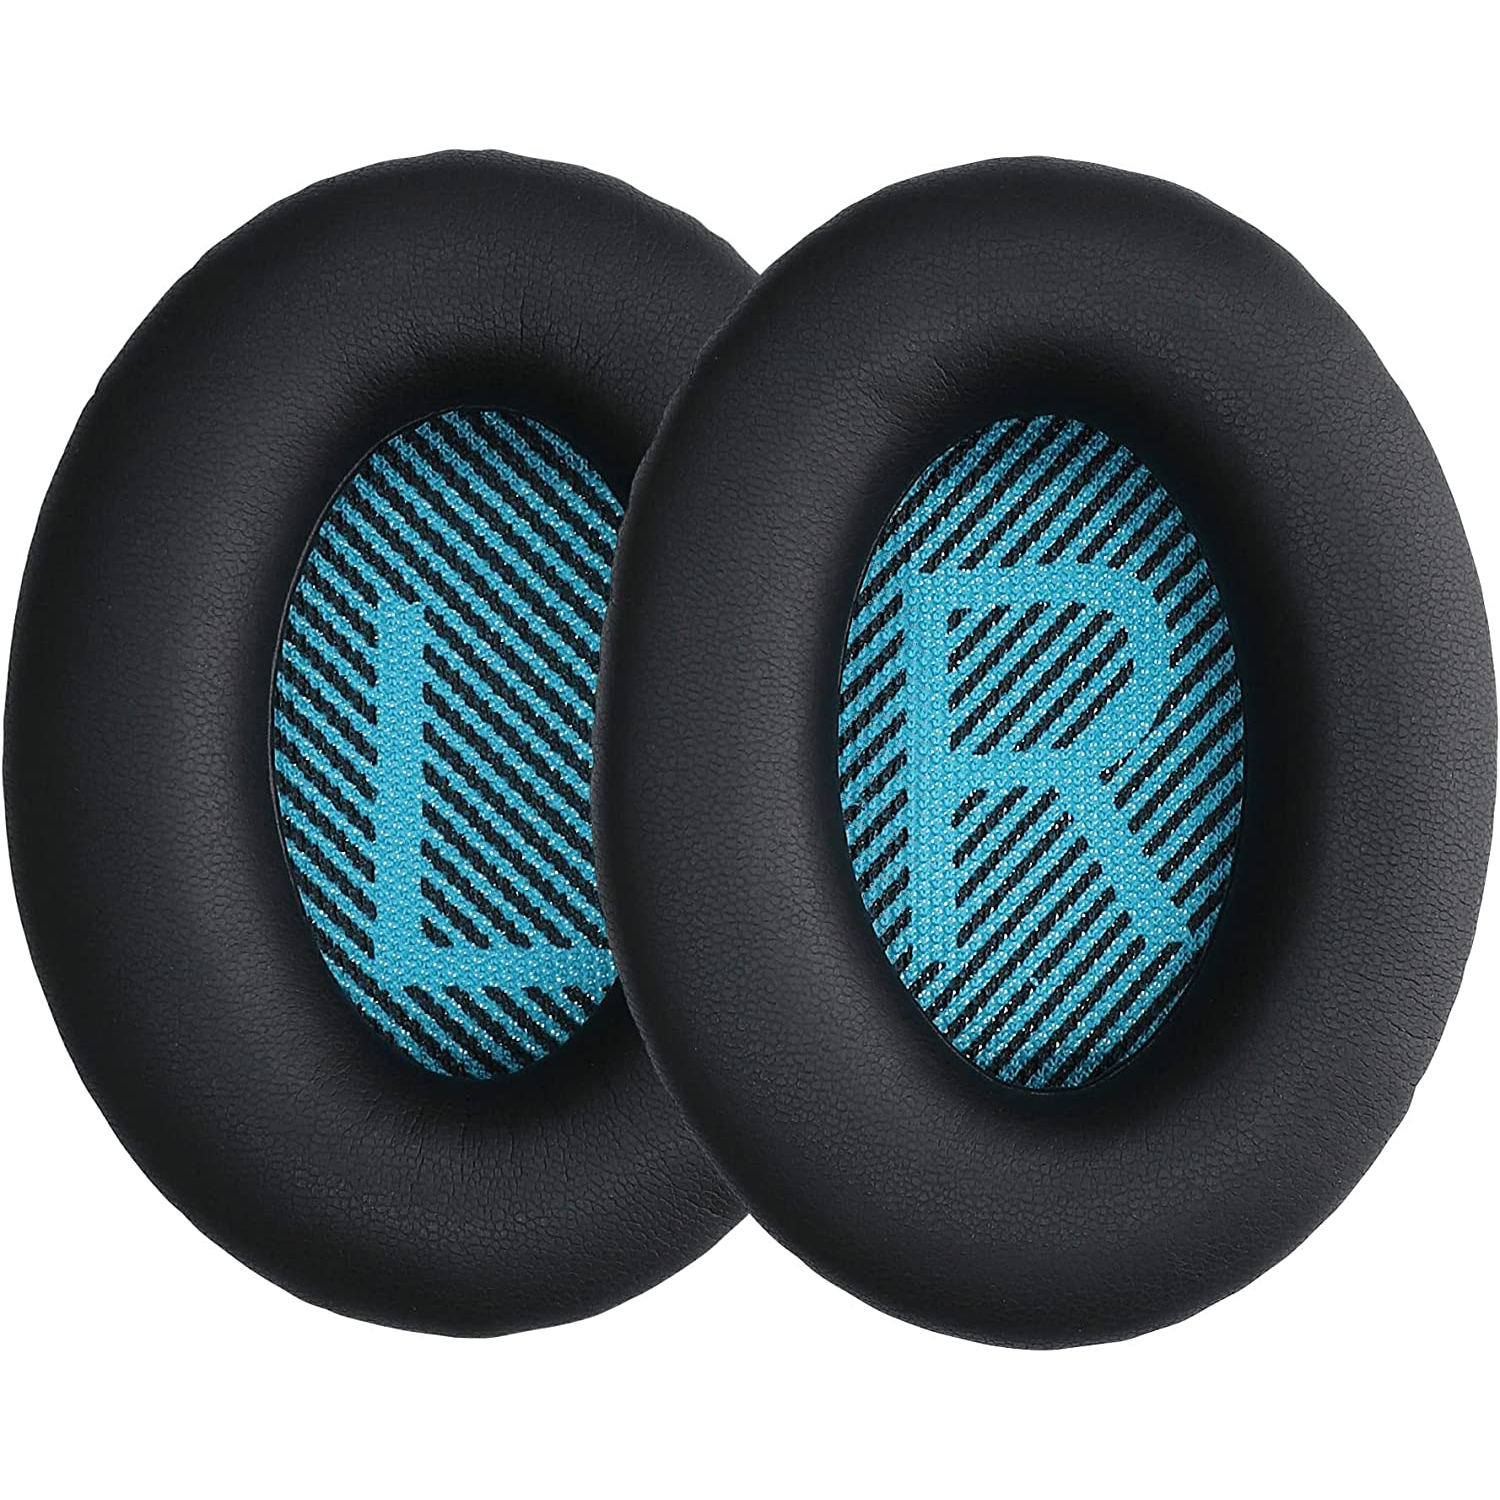 Dolaer kwmobile Replacement Ear Pads Compatible with Bose Soundlink Around-Ear Wireless II - Earpads Set for Headphones - Black